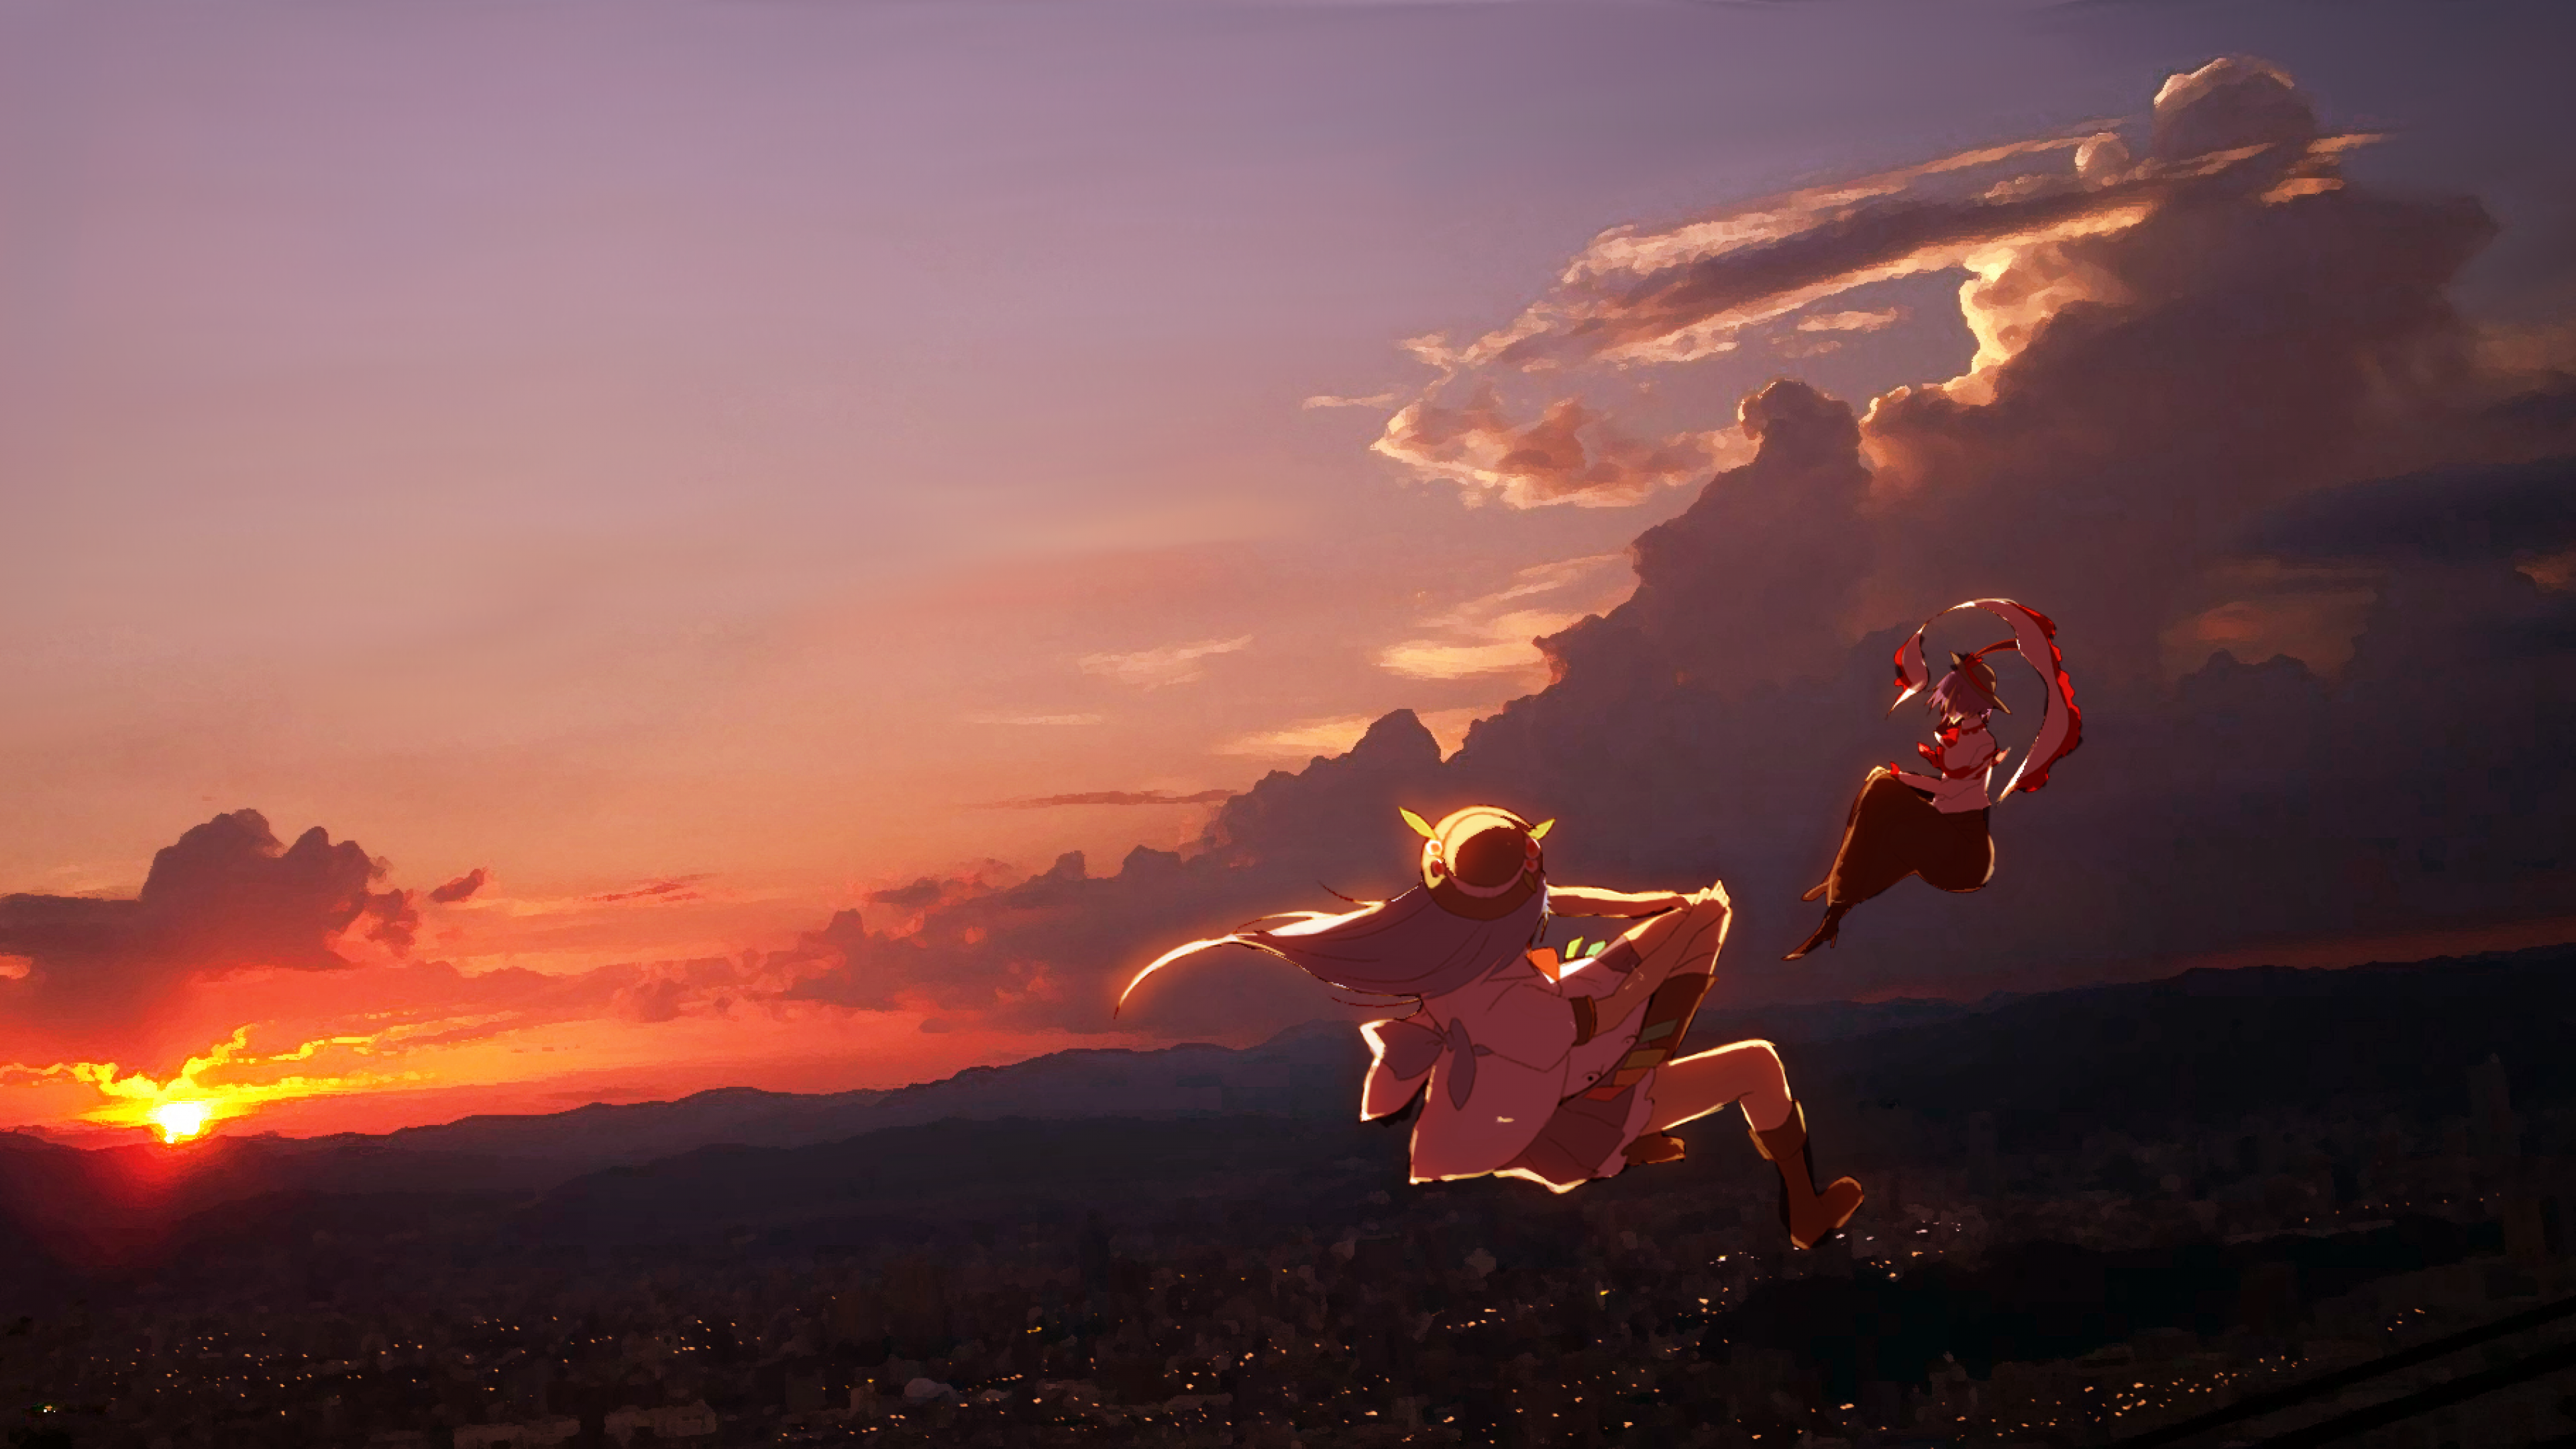 Download 3840x2160 Anime Landscape, Sky, Sunset, Clouds, Anime Girls Wallpaper for UHD TV